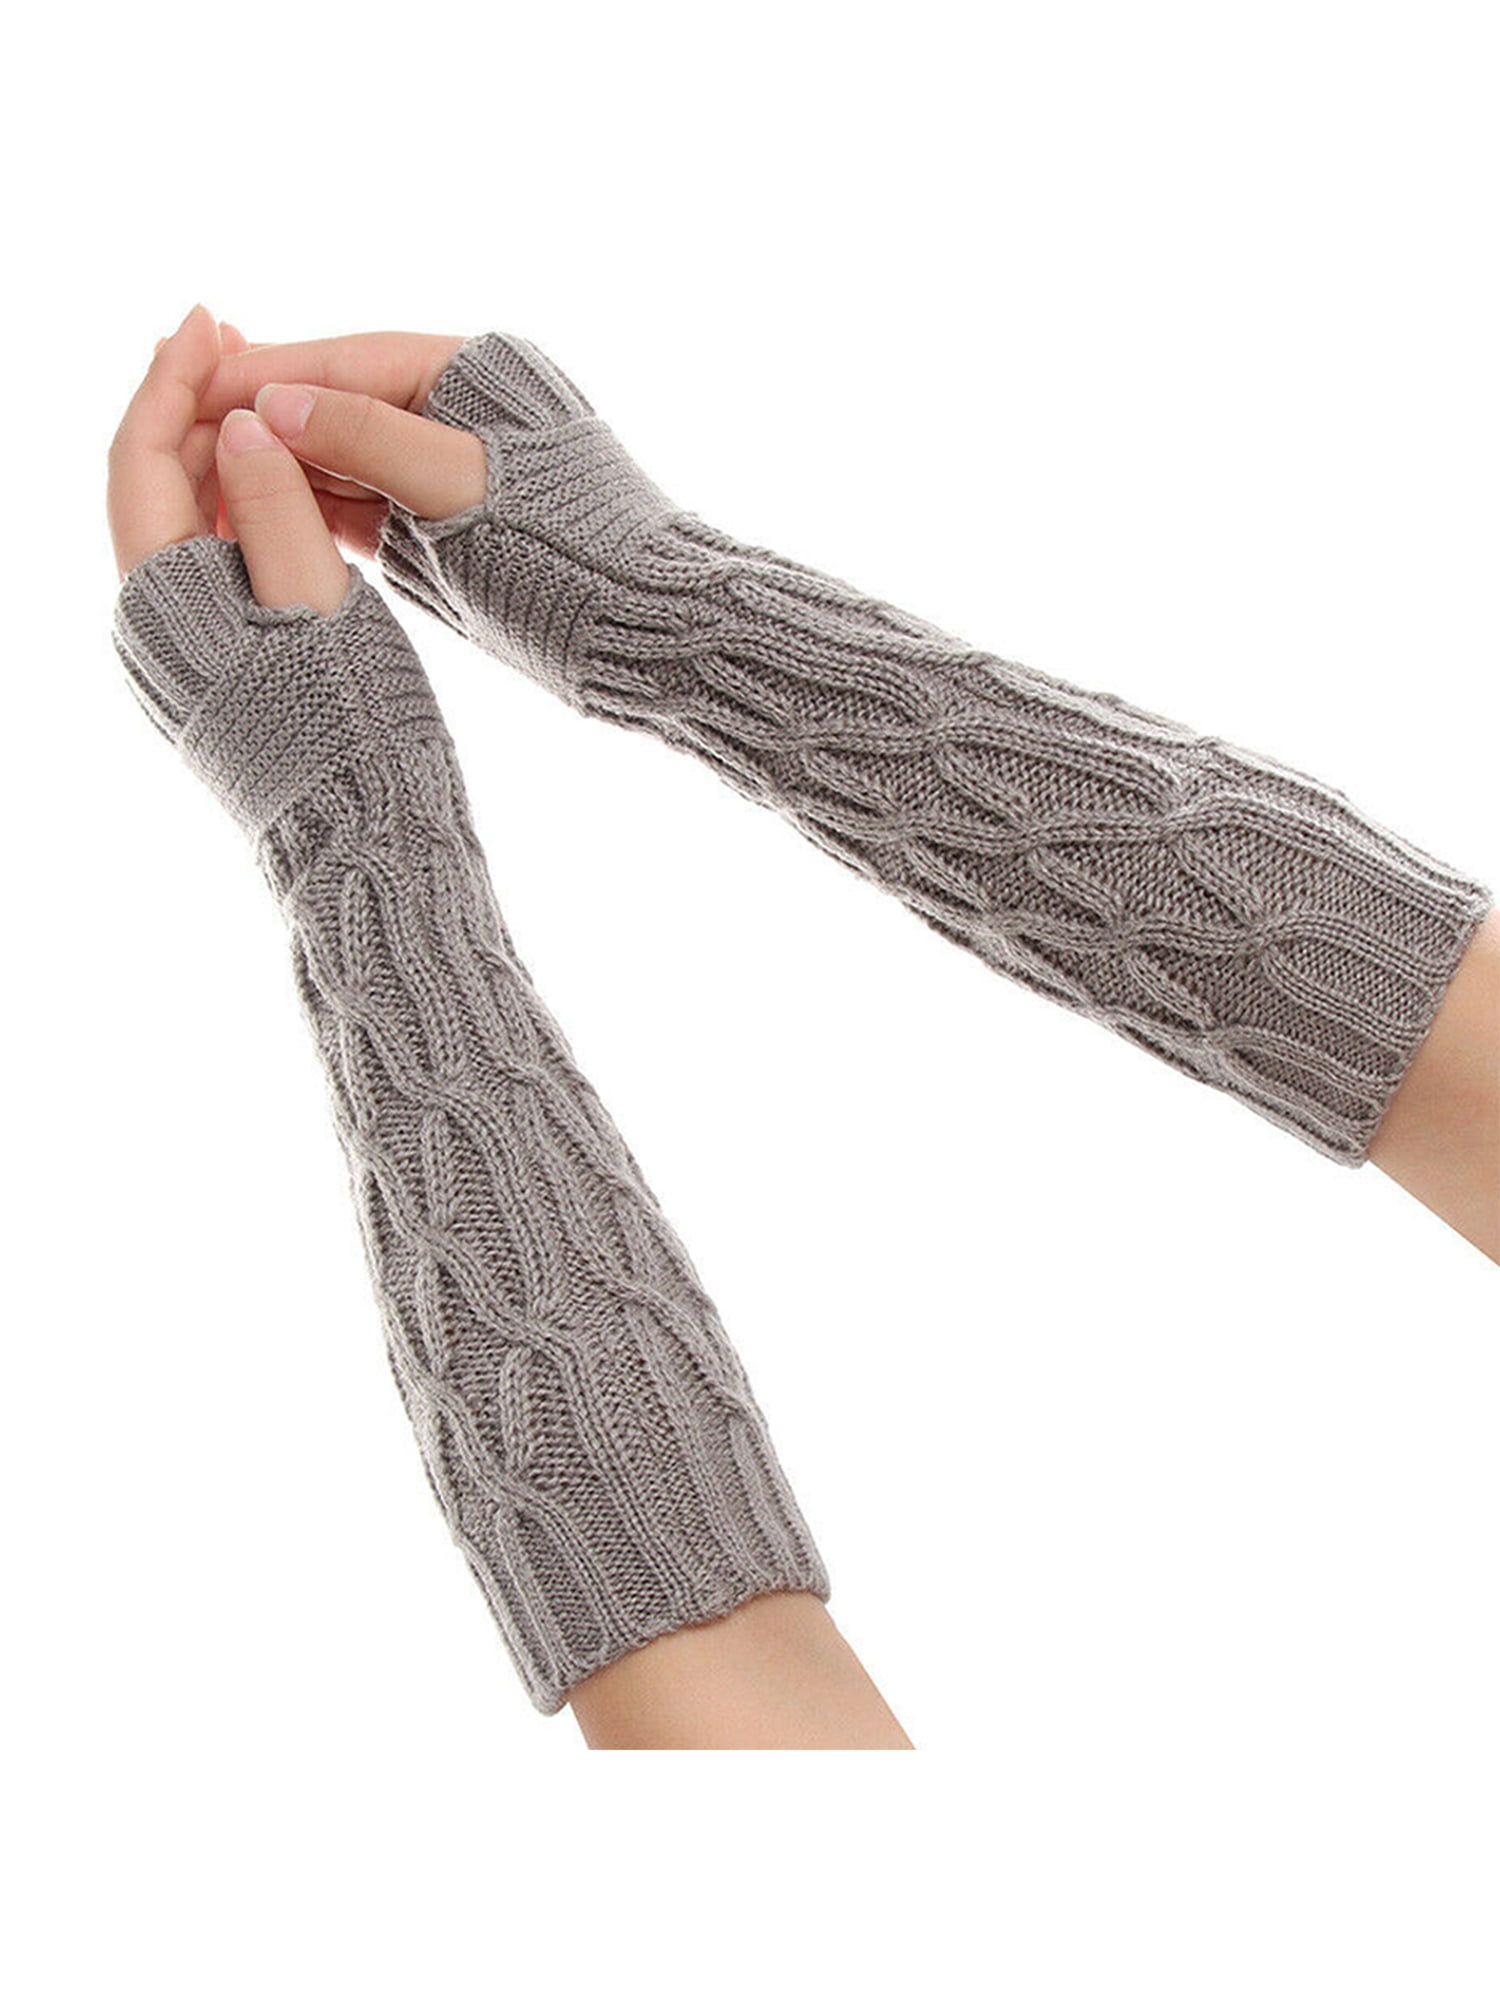 Christmas Gift Thermal Fleece Hand Wrist Warmer Protector Armwarmers Wool Soft Warm Mitten Arm Sleeve for Ladies Women Girls Winter Fingerless Knitted Arm Warmer with Thumb Hole Long Gloves 